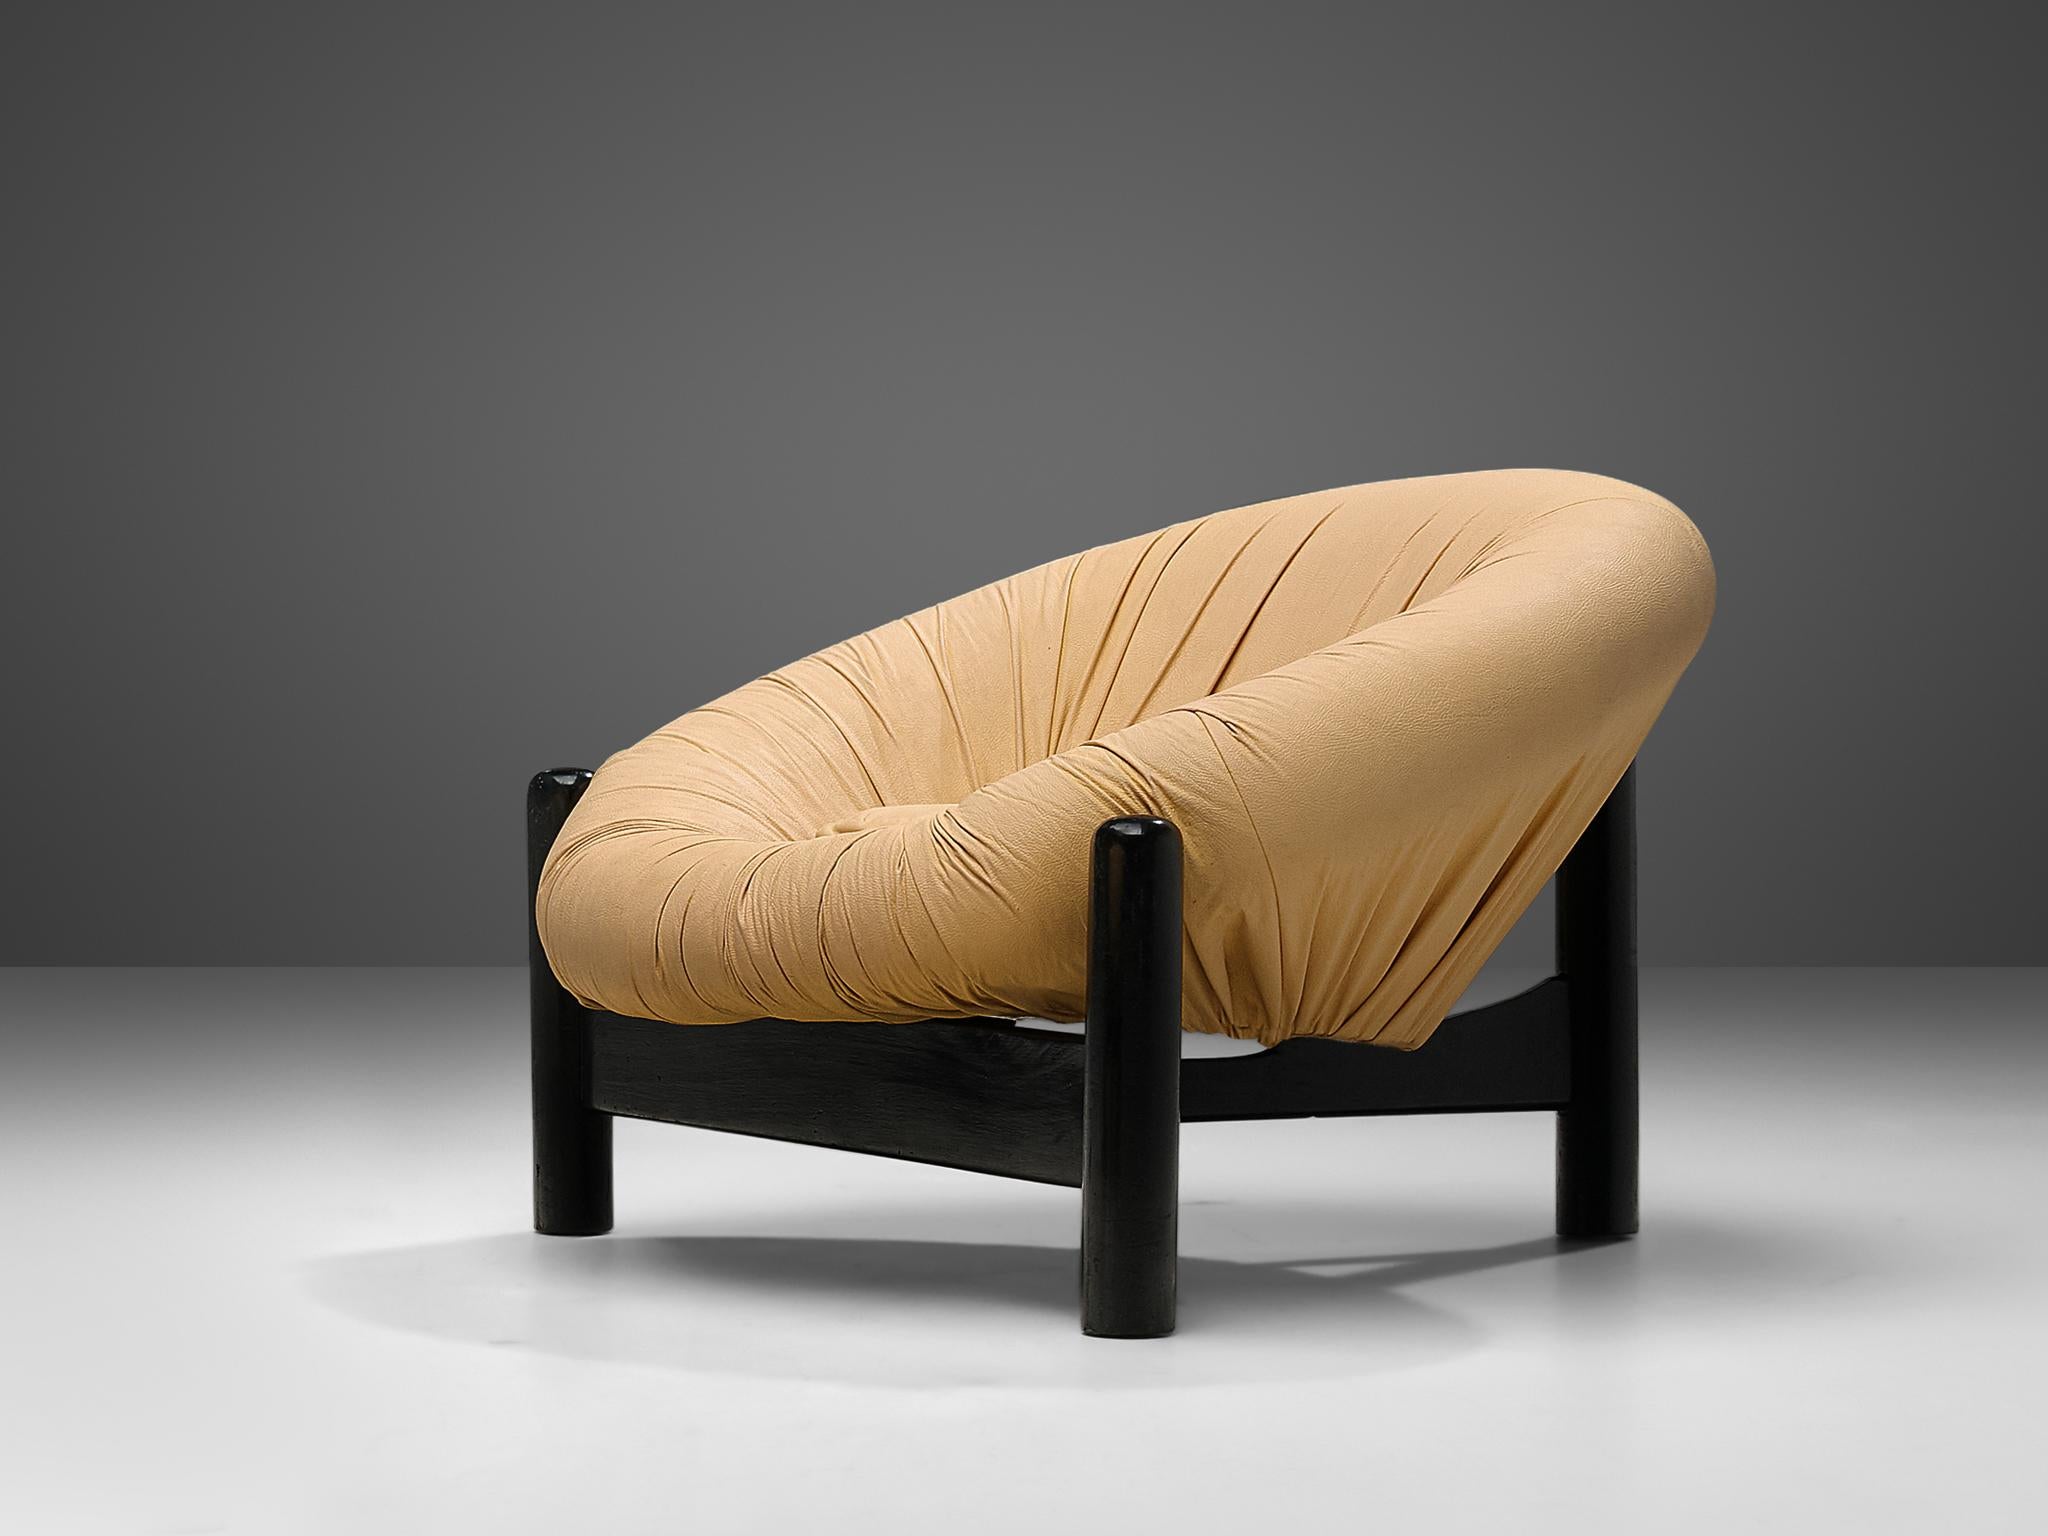 Customizable lounge chair, lacquered wood, yellow leatherette, Brazil, 1970s

This bulky Brazilian lounge chair consists of a round shell that forms a ring around the seat. The beige leatherette is tufted around the shell in dynamic folds. The